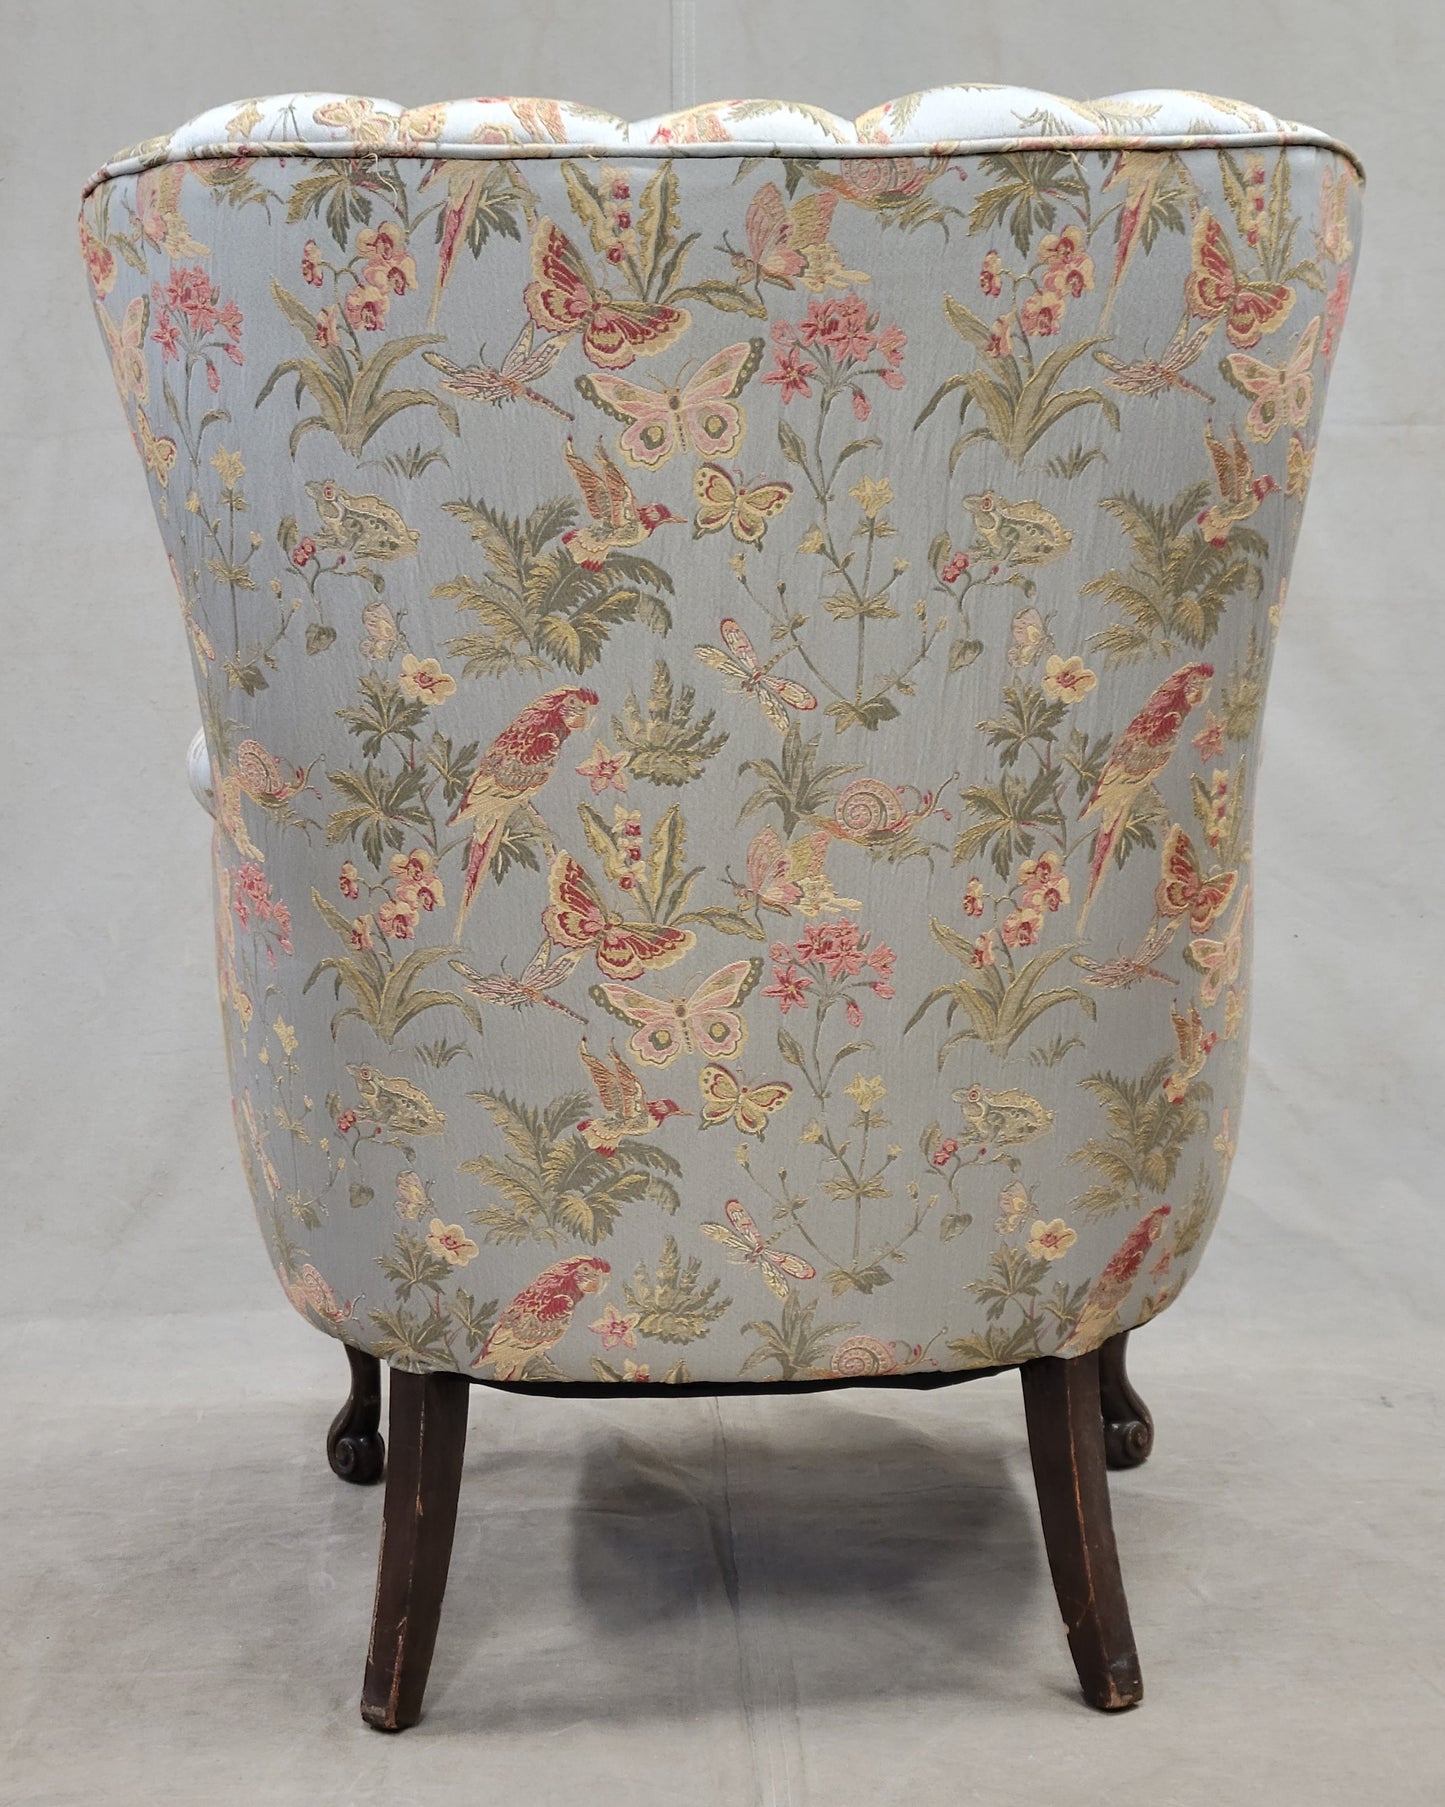 Vintage 1930s Art Deco Fan Back Bergere Chair With Kravet Parrot and Butterfly Damask Fabric